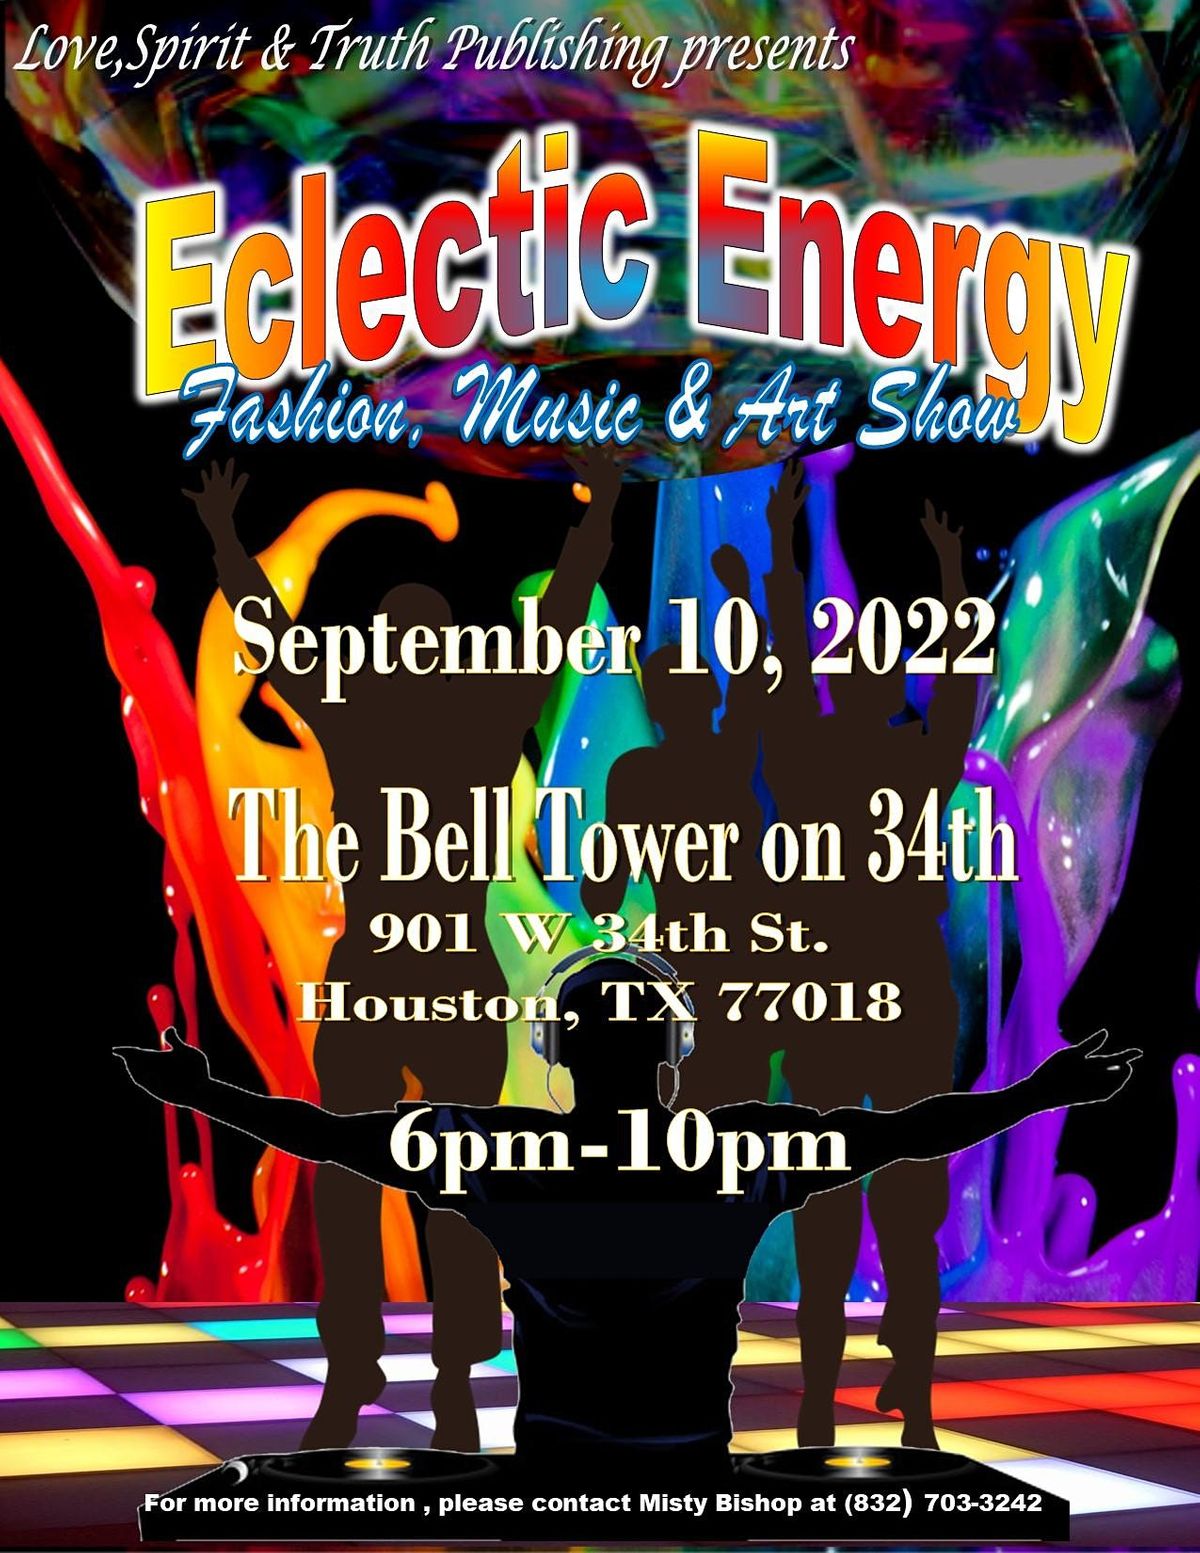 Eclectic Energy-Fashion, Music & Art Show